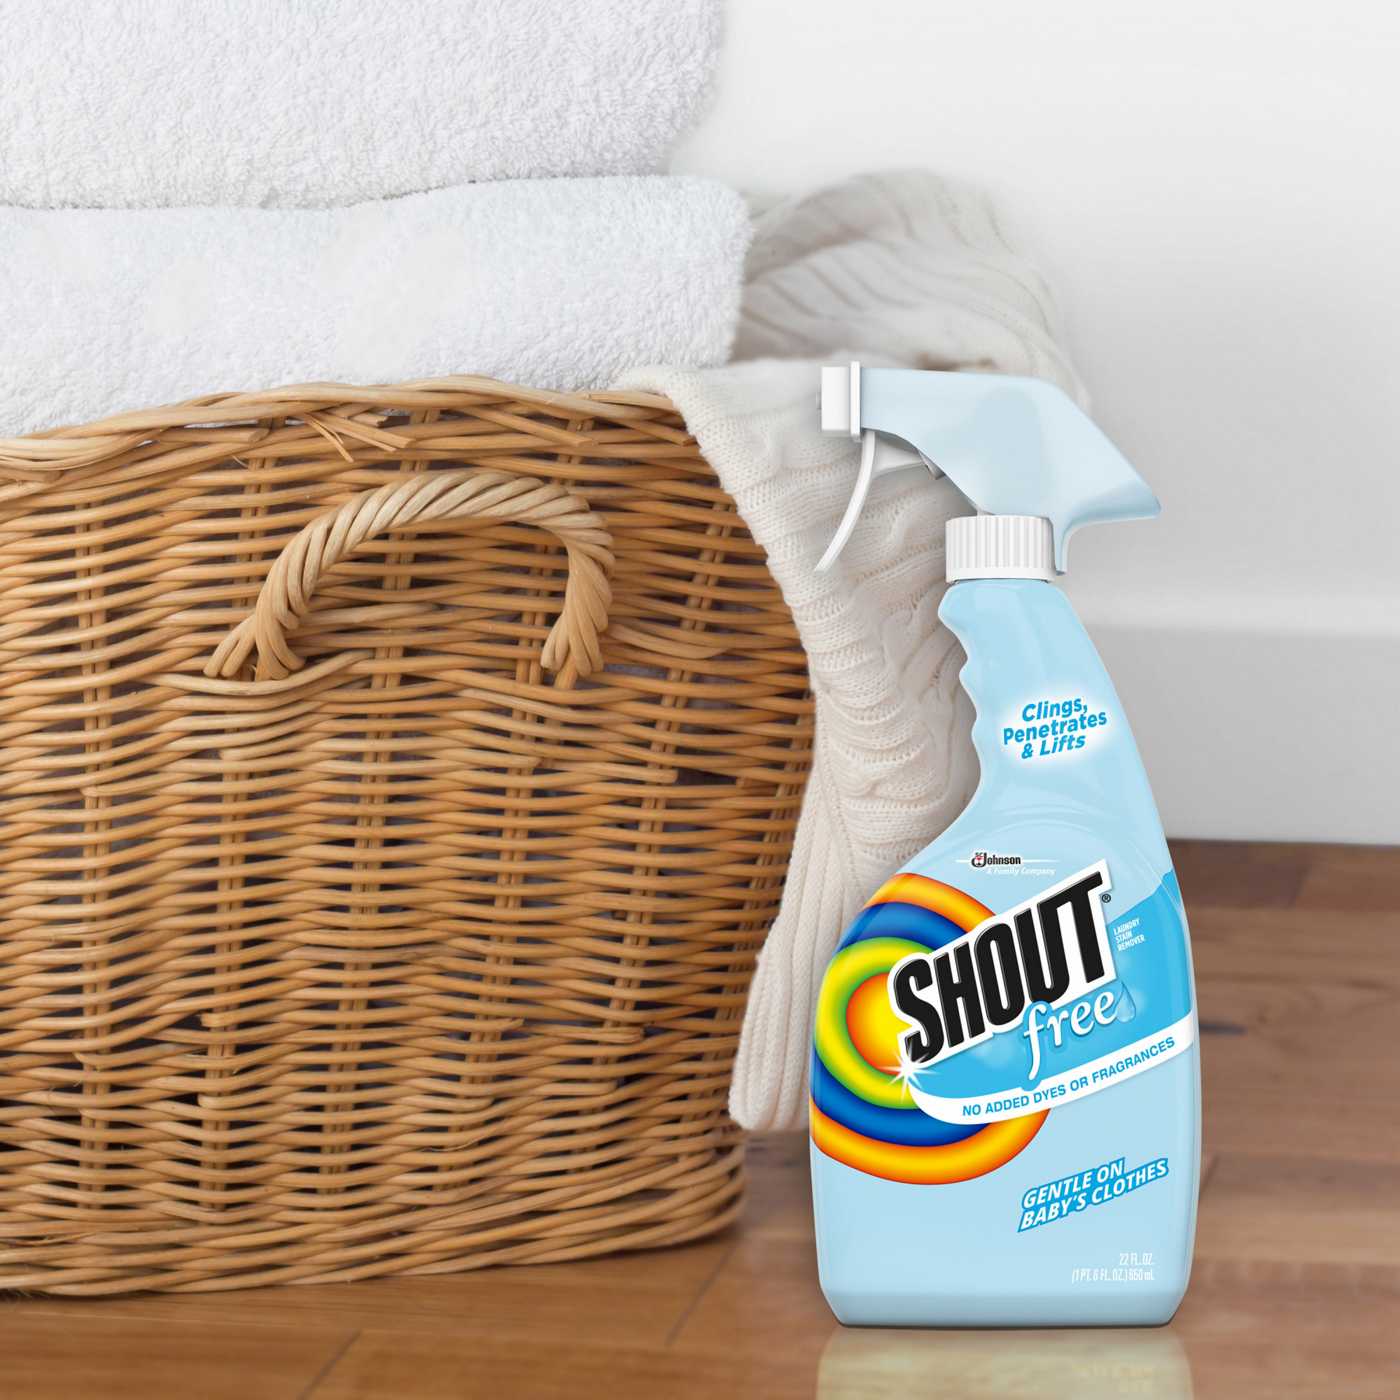 Shout Dye & Fragrance Free Laundry Stain Remover; image 10 of 10